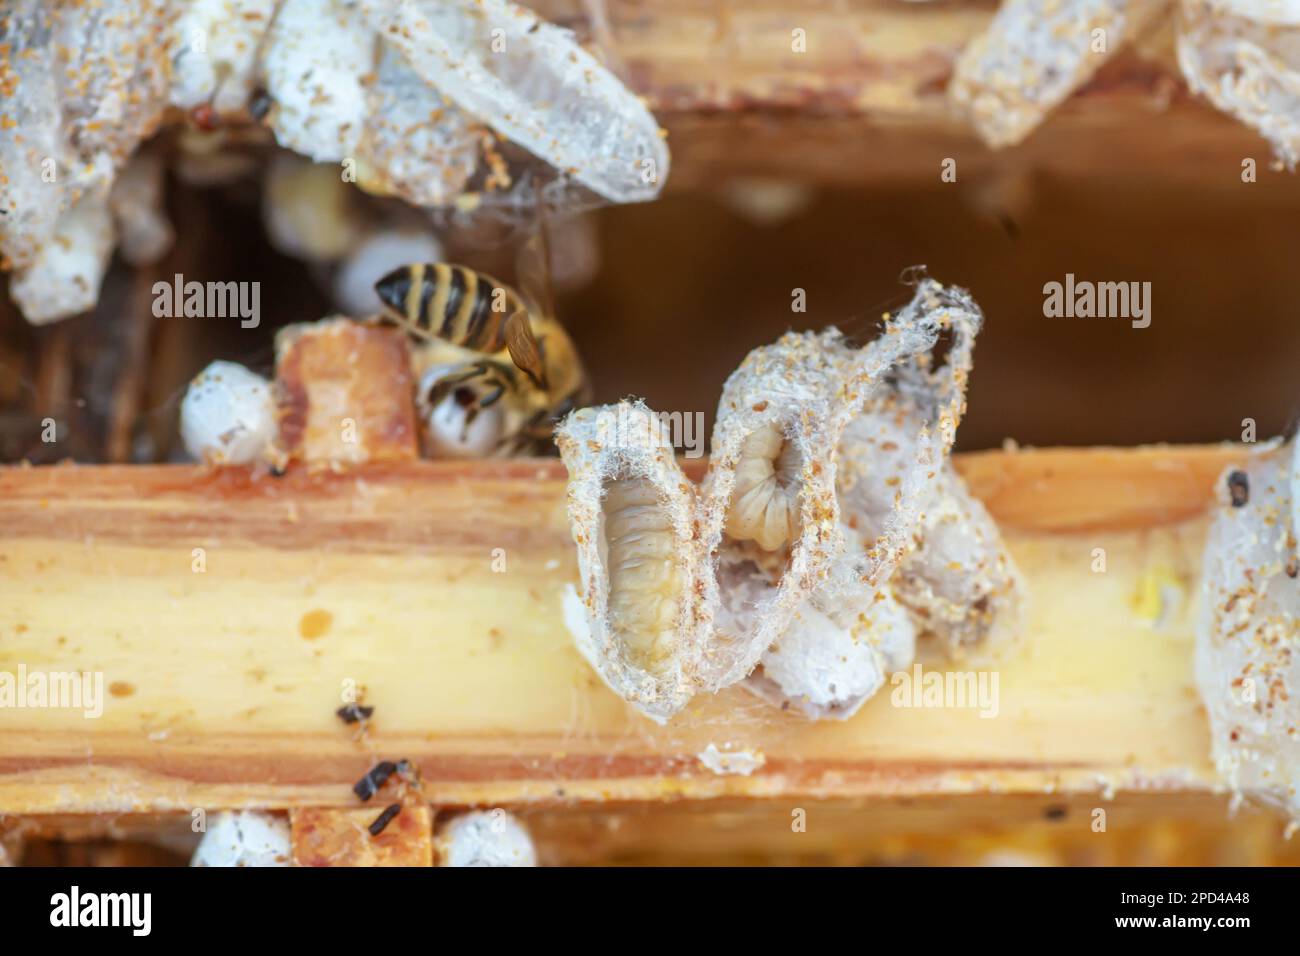 Fully-grown larvae form cocoons in comb debris, attached to frame or hive body. Larvae chew cavities to cement the cocoons, and lasting damage is done Stock Photo